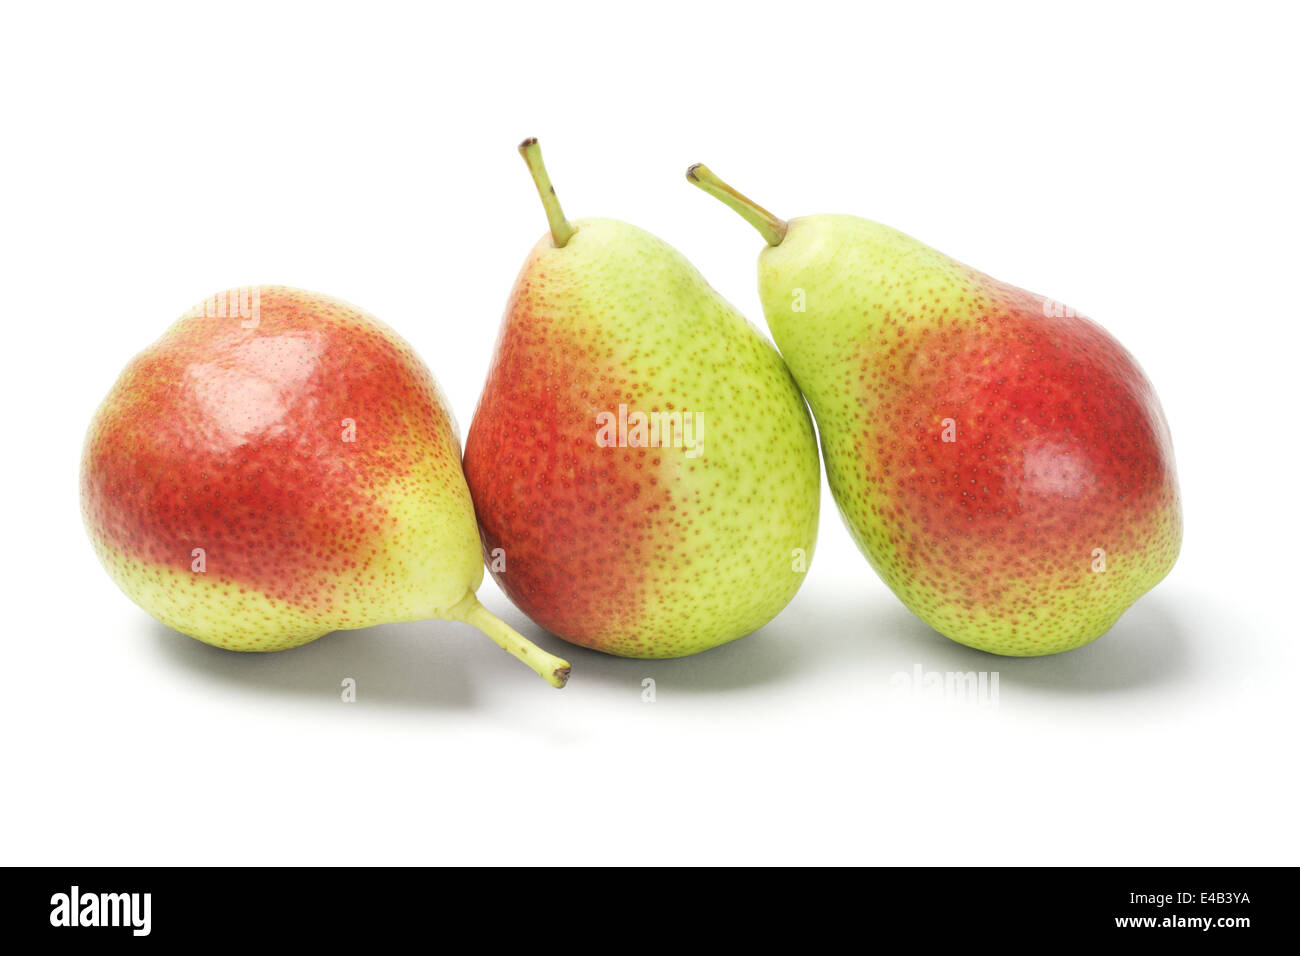 Three Blush Pears In A Row On White Background Stock Photo